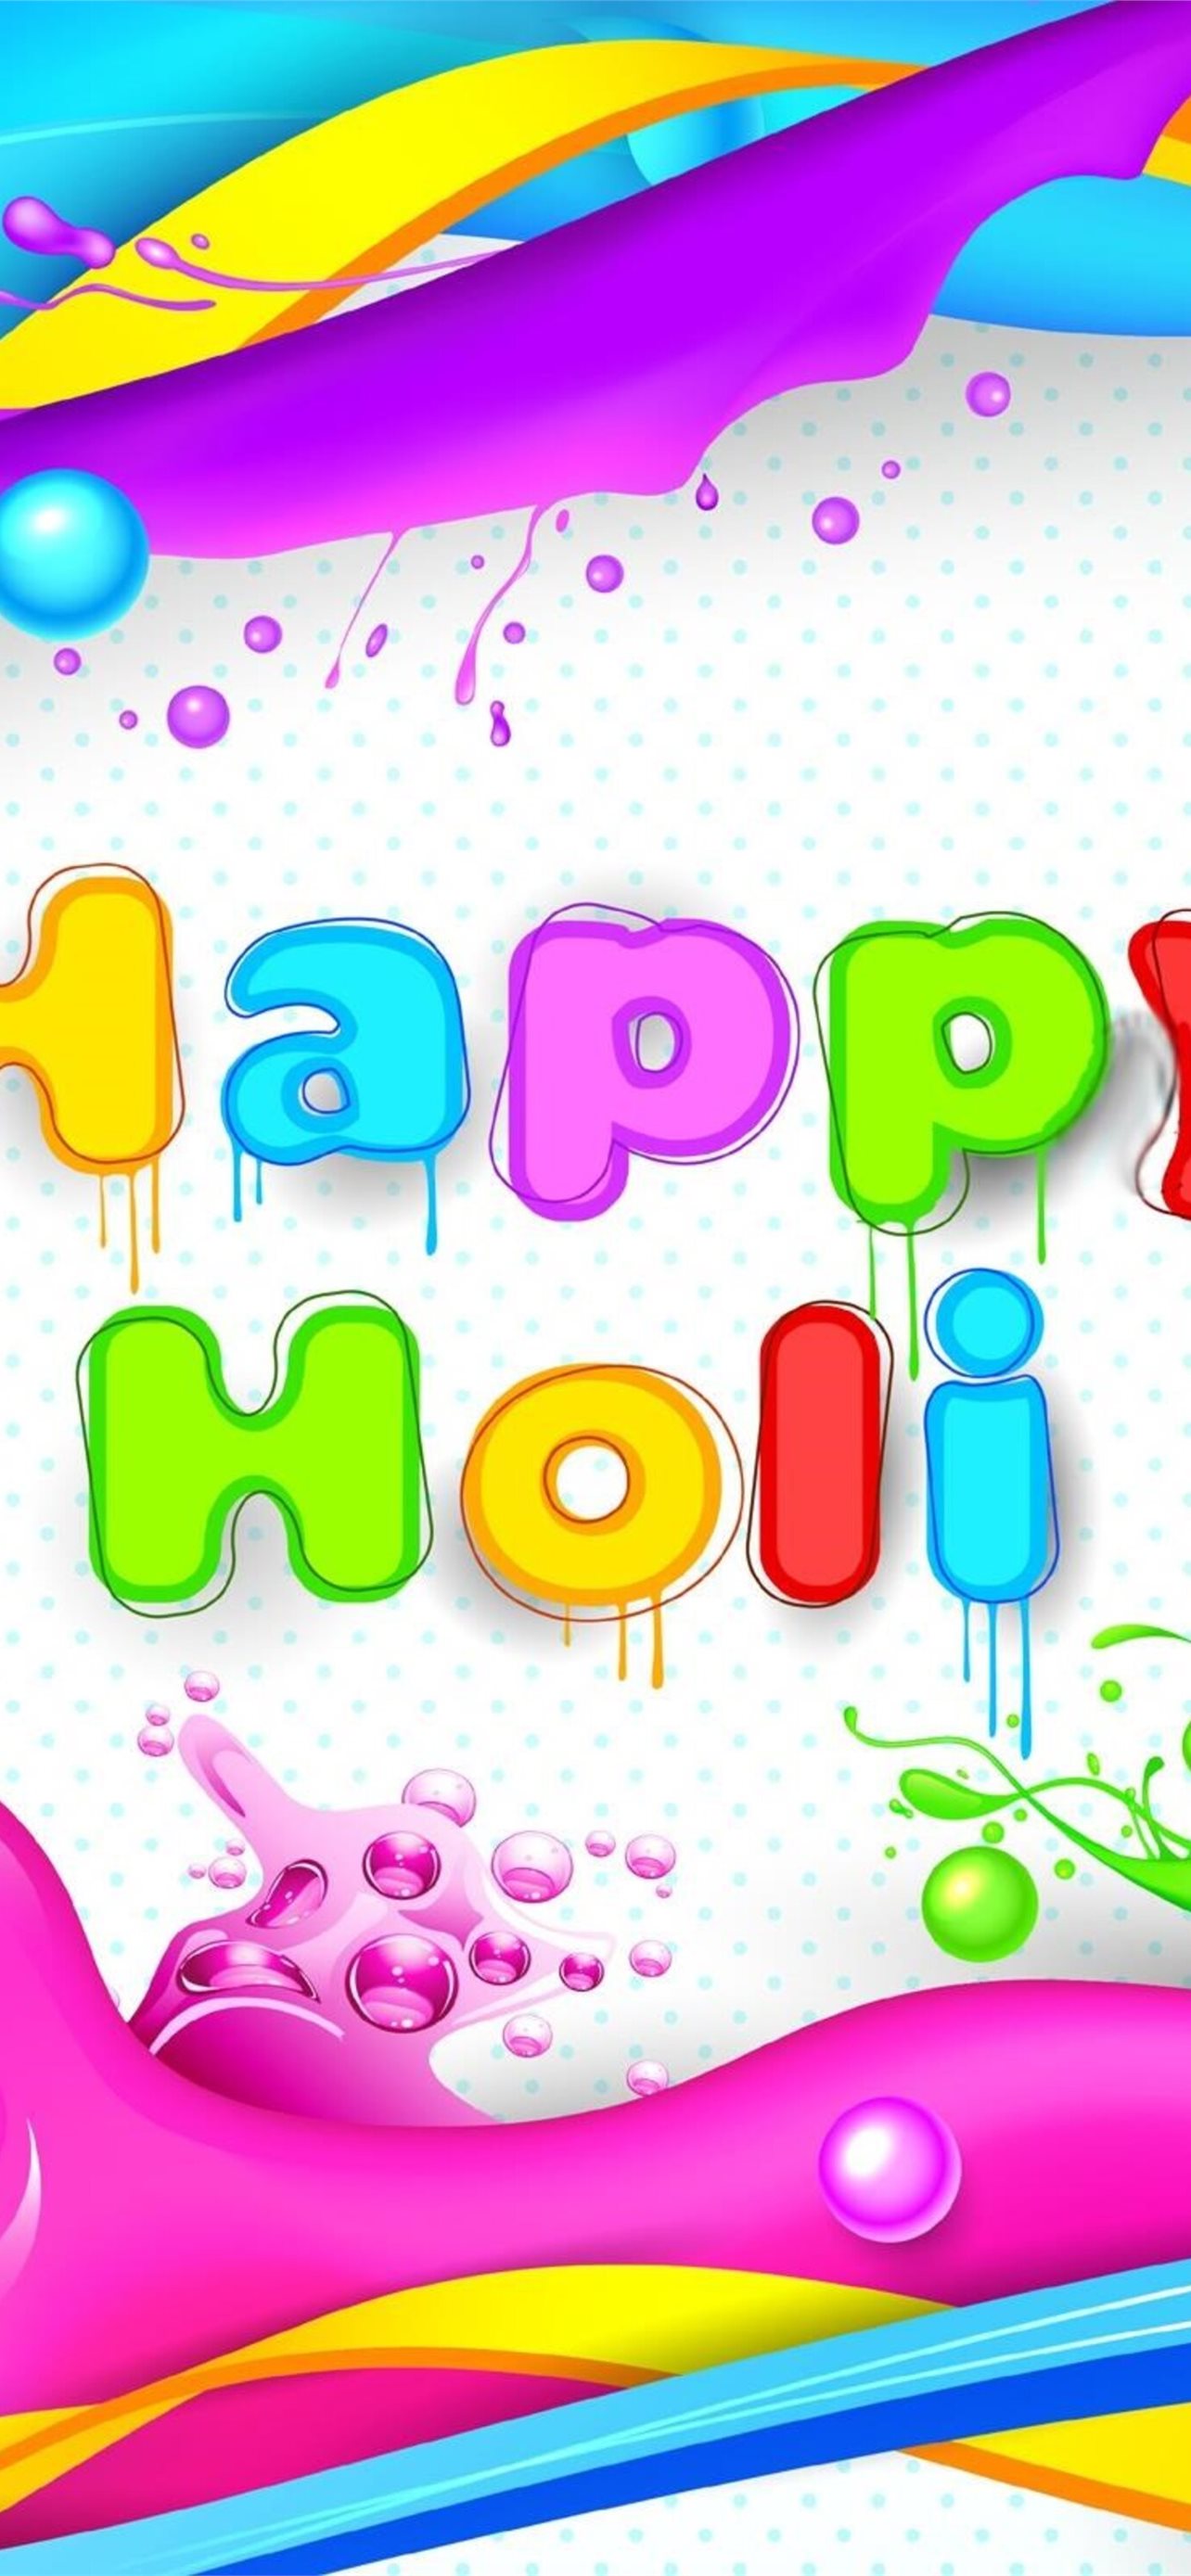 Happy Holi 2020 Stickers Wallpapers  Colourful Images HD Free Download